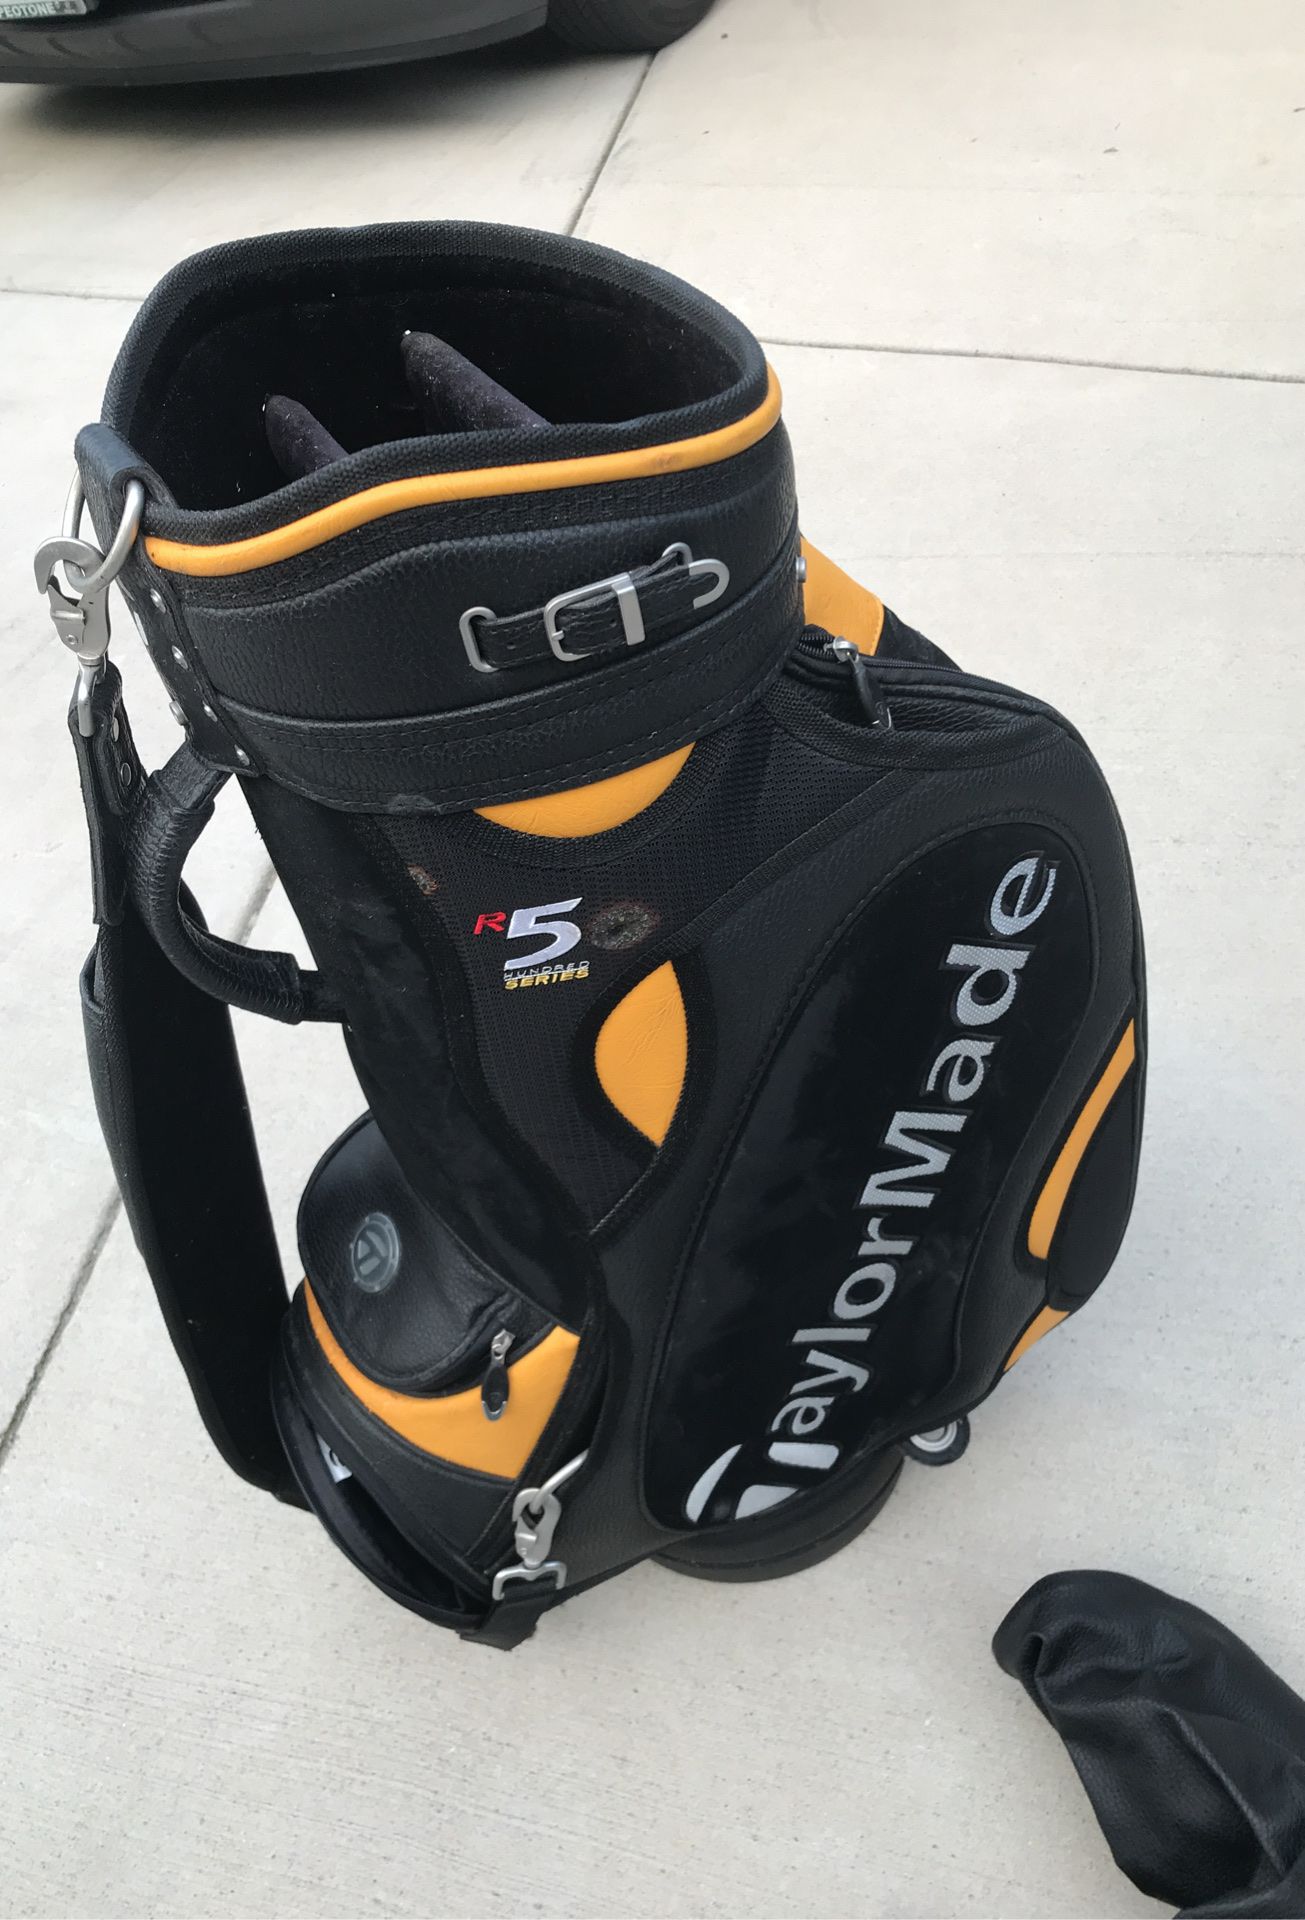 Taylormade R5 series golf cart bag with raincover